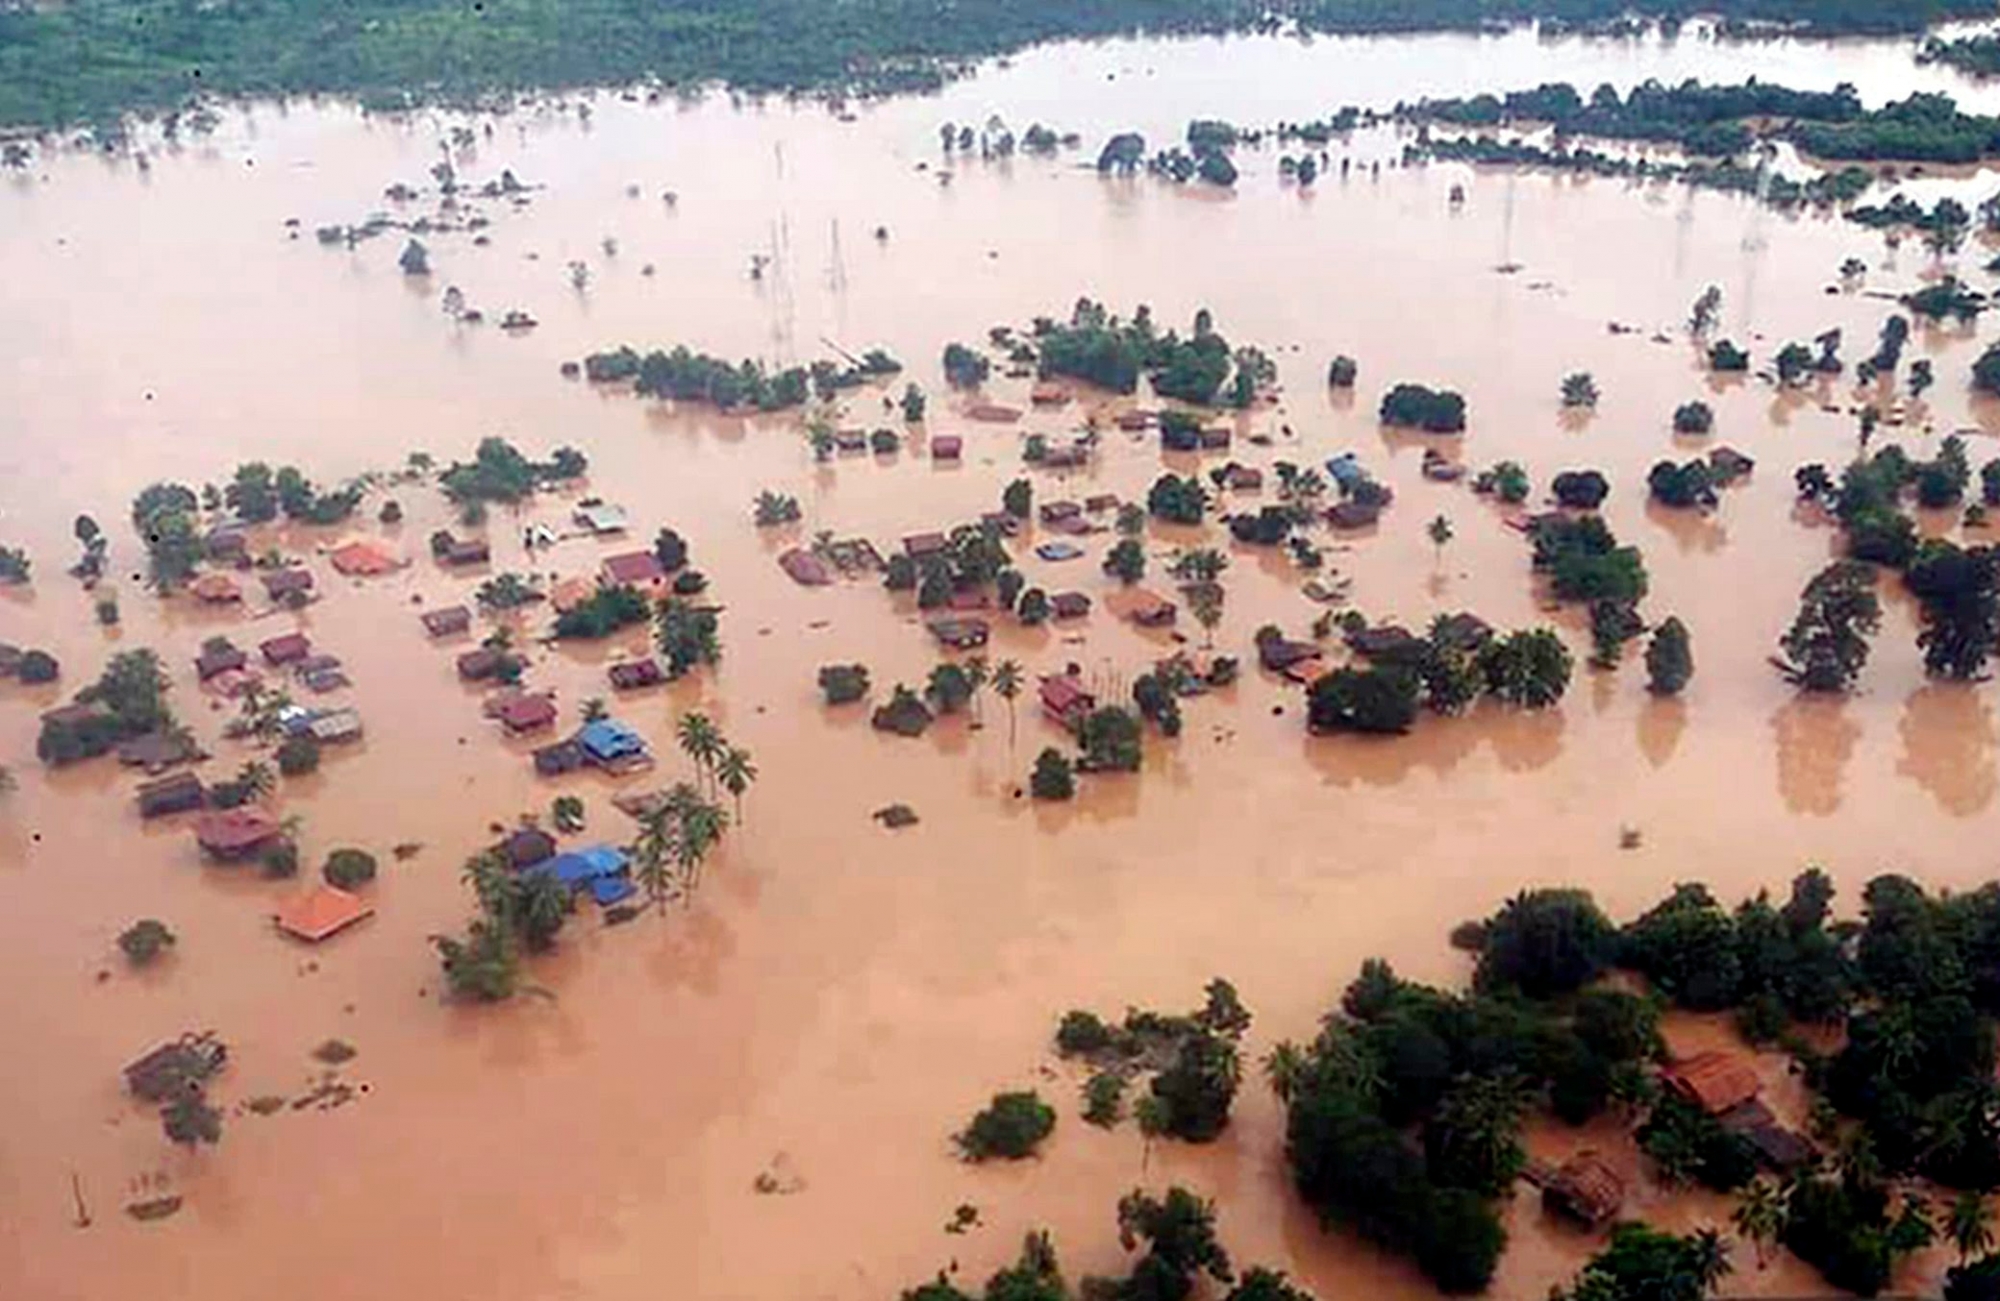 epa06910022 An undated photo made available on 25 July 2018 by ABC Laos News shows aerial view of houses are submerged by floodwaters after the Xe Pian Xe Nam Noy dam collapsed in villages near Attapeu province, Laos. Nearly 20 people are dead and hundreds missing after the Xe Pian Xe Nam Noy hydroelectric dam burst, causing heavy flash floods through several villages, leaving hundreds of households submerged underwater.  EPA/ABC LAOS NEWS HANDOUT EDITORIAL USE ONLY/ NO SALES; BEST QUALITY AVAILABLE HANDOUT EDITORIAL USE ONLY/NO SALES LAOS DAM FLOOD ACCIDENT